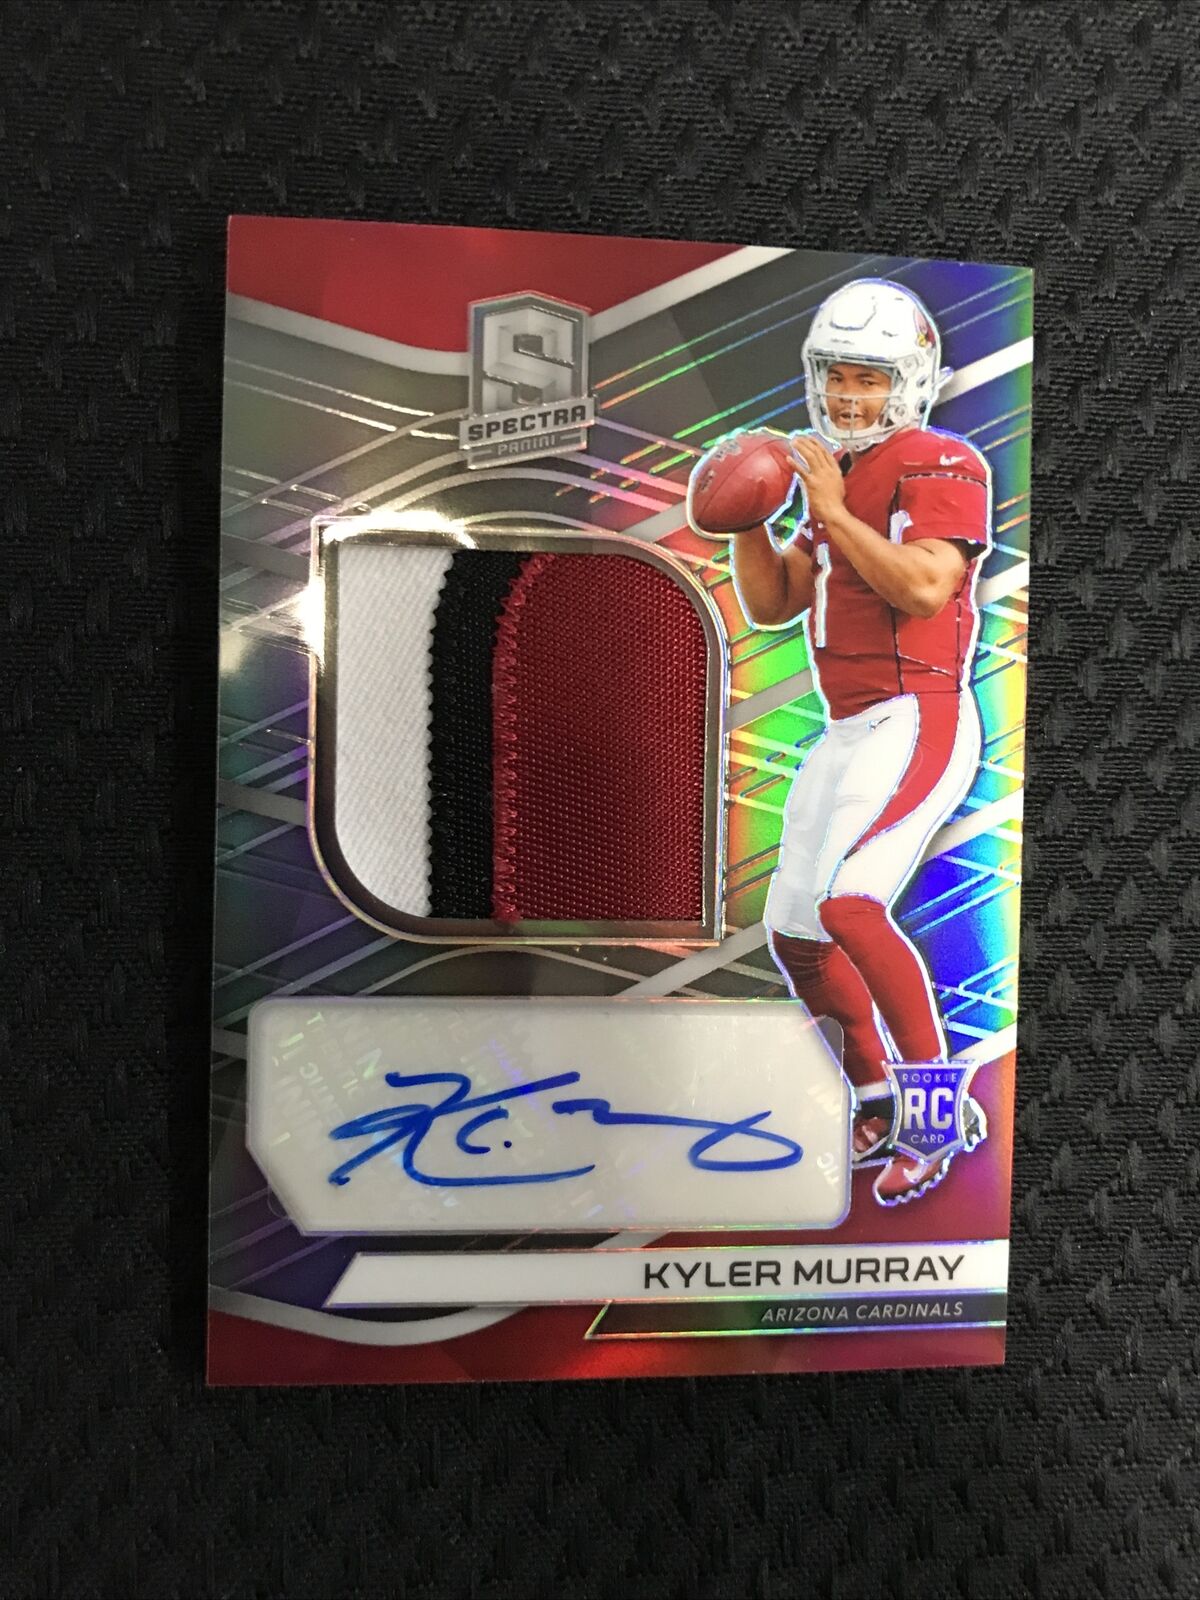 Kyler Murray 2019 Panini Spectra Silver Prizm Auto #/99 Jersey 3-Color Patch RC